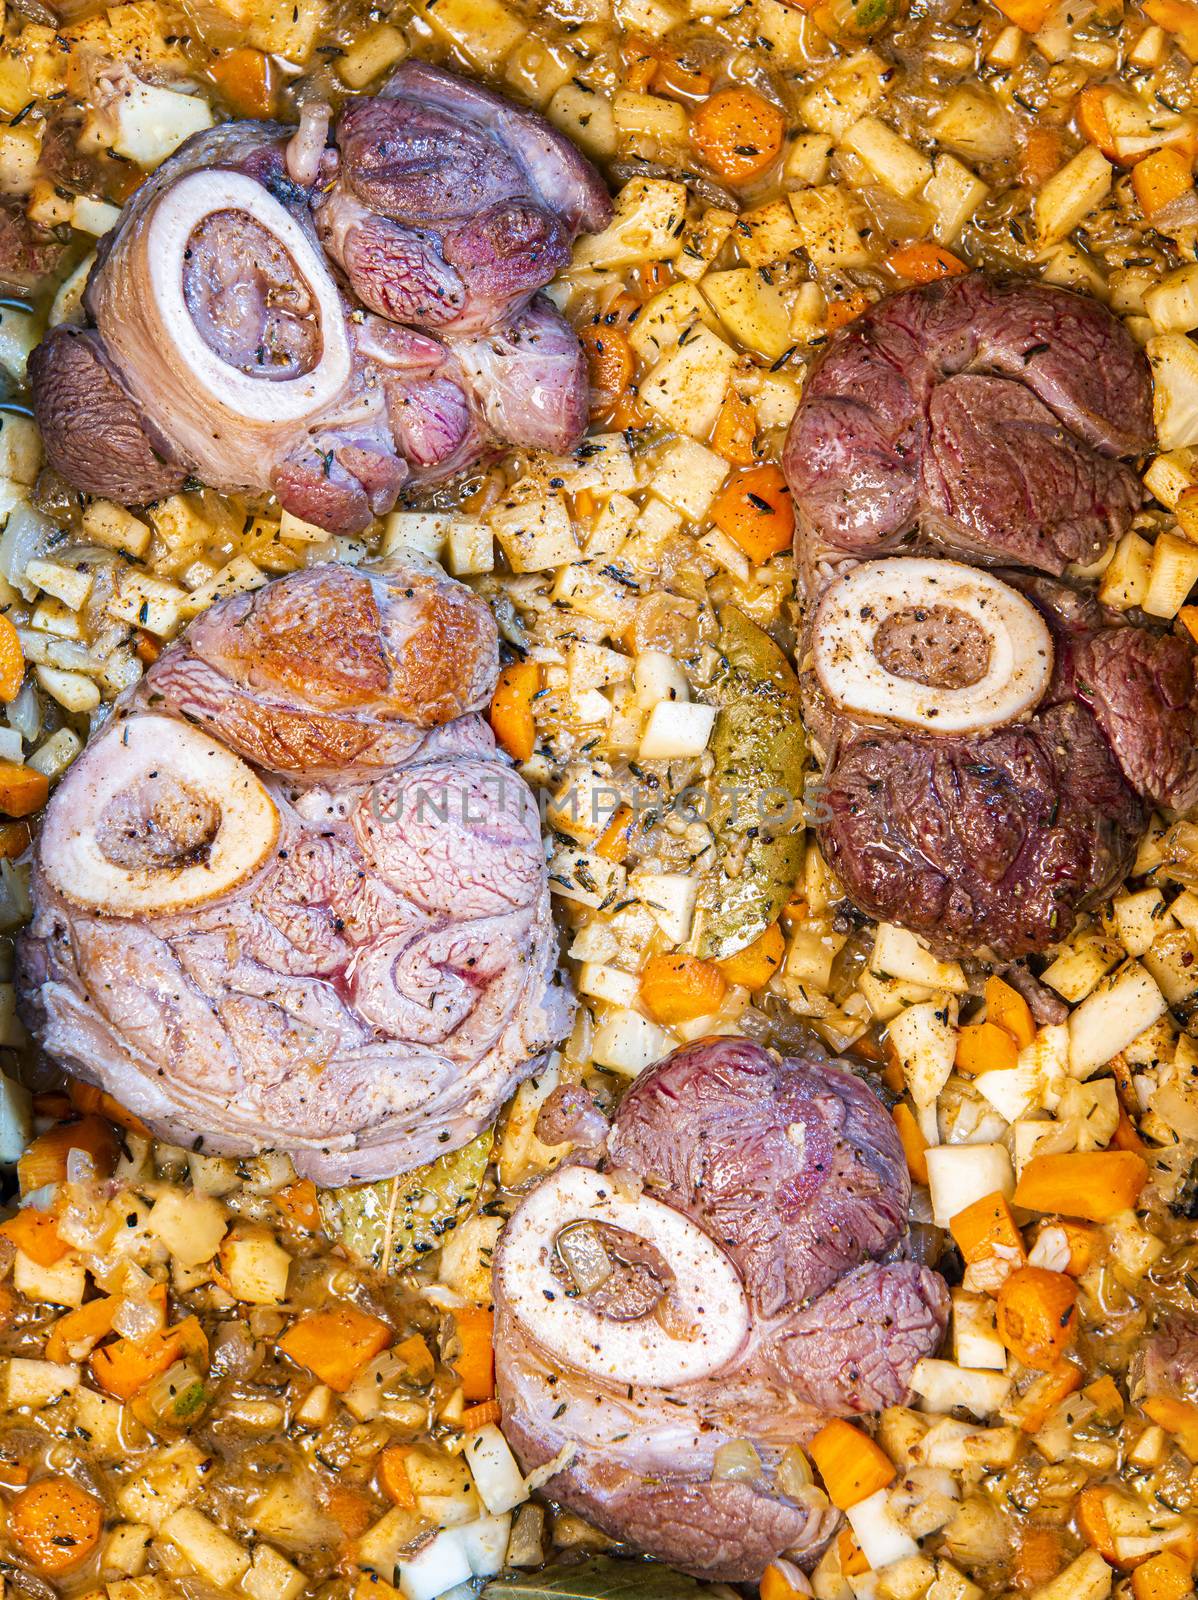 Osso buco in bianco is traditional Italain dish from the Milan area. The veal meat slices with marrow bone are being cooked in a large casserole along with root vegetables, spice and wine sauce